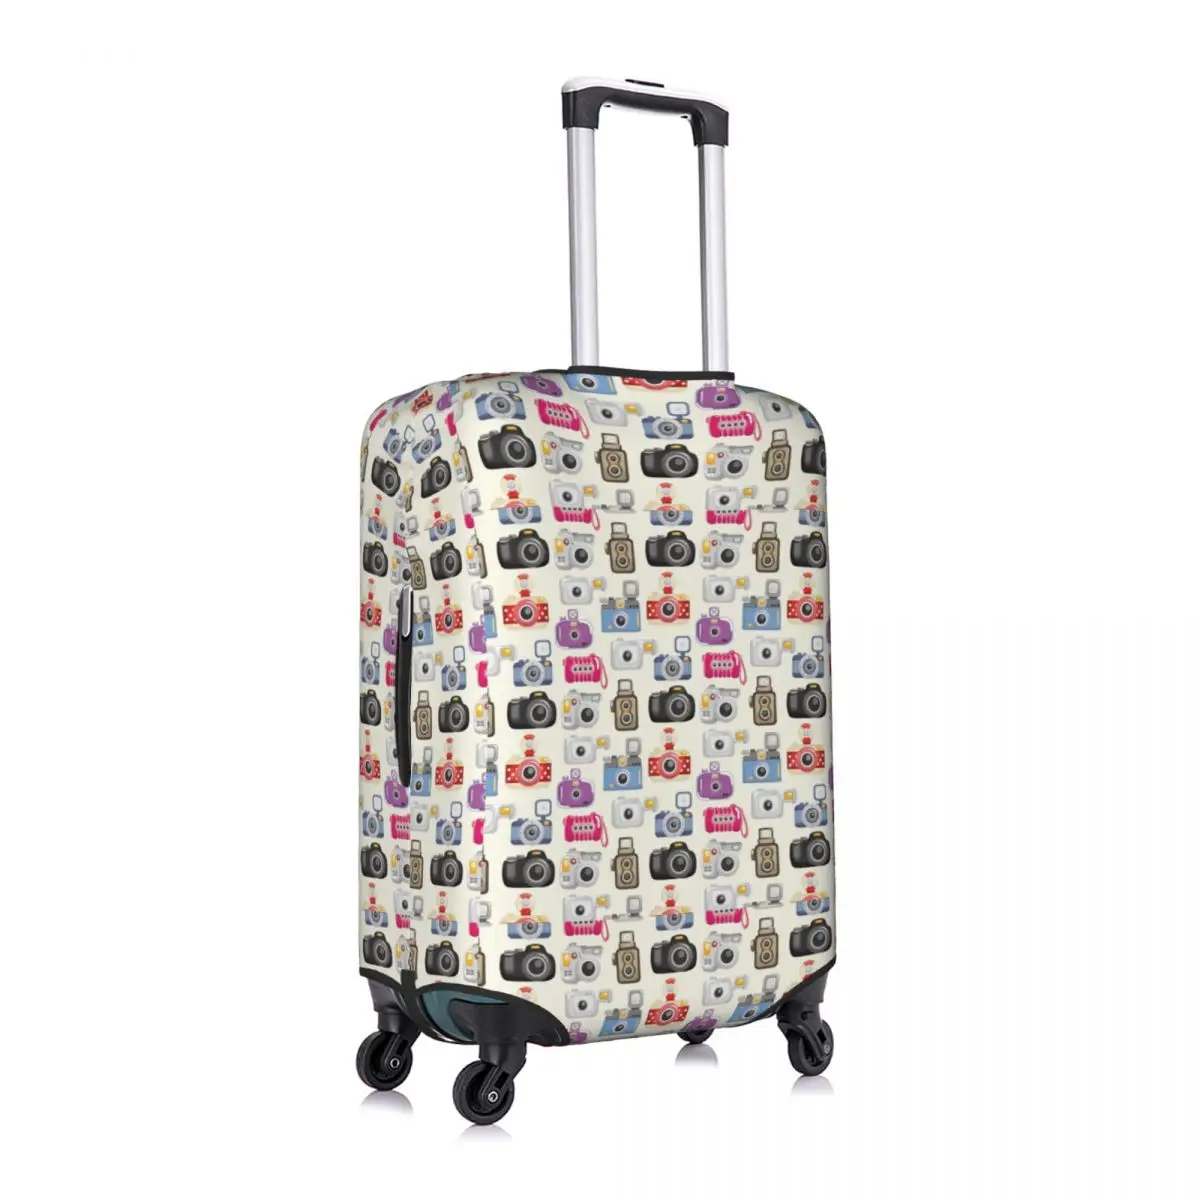 

Camera Pattern Luggage Cover Spandex Suitcase Protector Fits 19-21 Inch